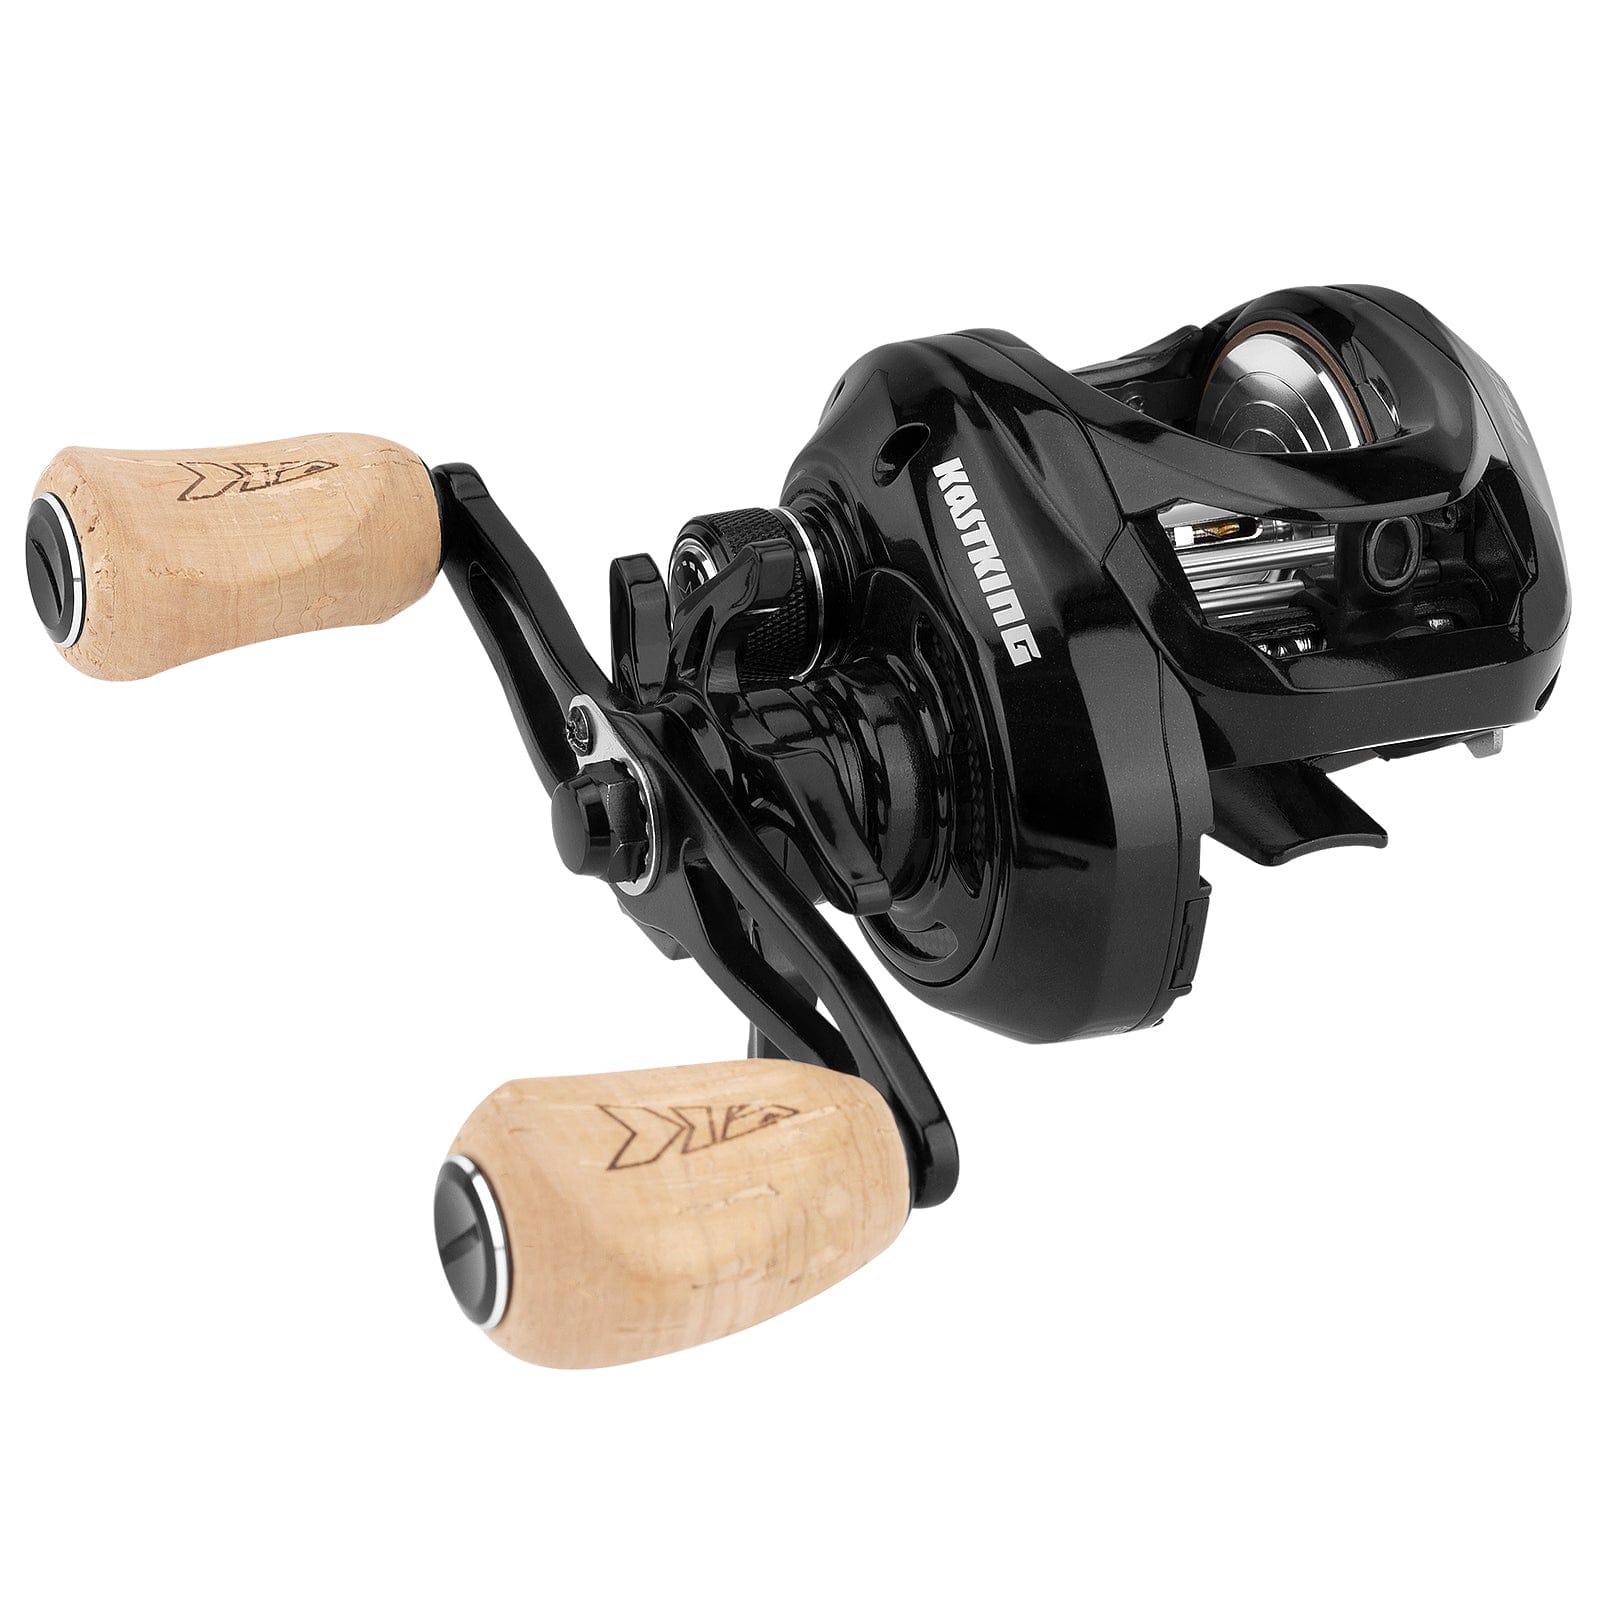 KastKing Megatron Spinning Reel, Great Saltwater Spinning Fishing Reel,  Rigid Aluminum Frame 7+1 Double-Shielded Stainless-Steel BB, Over 30 lbs.